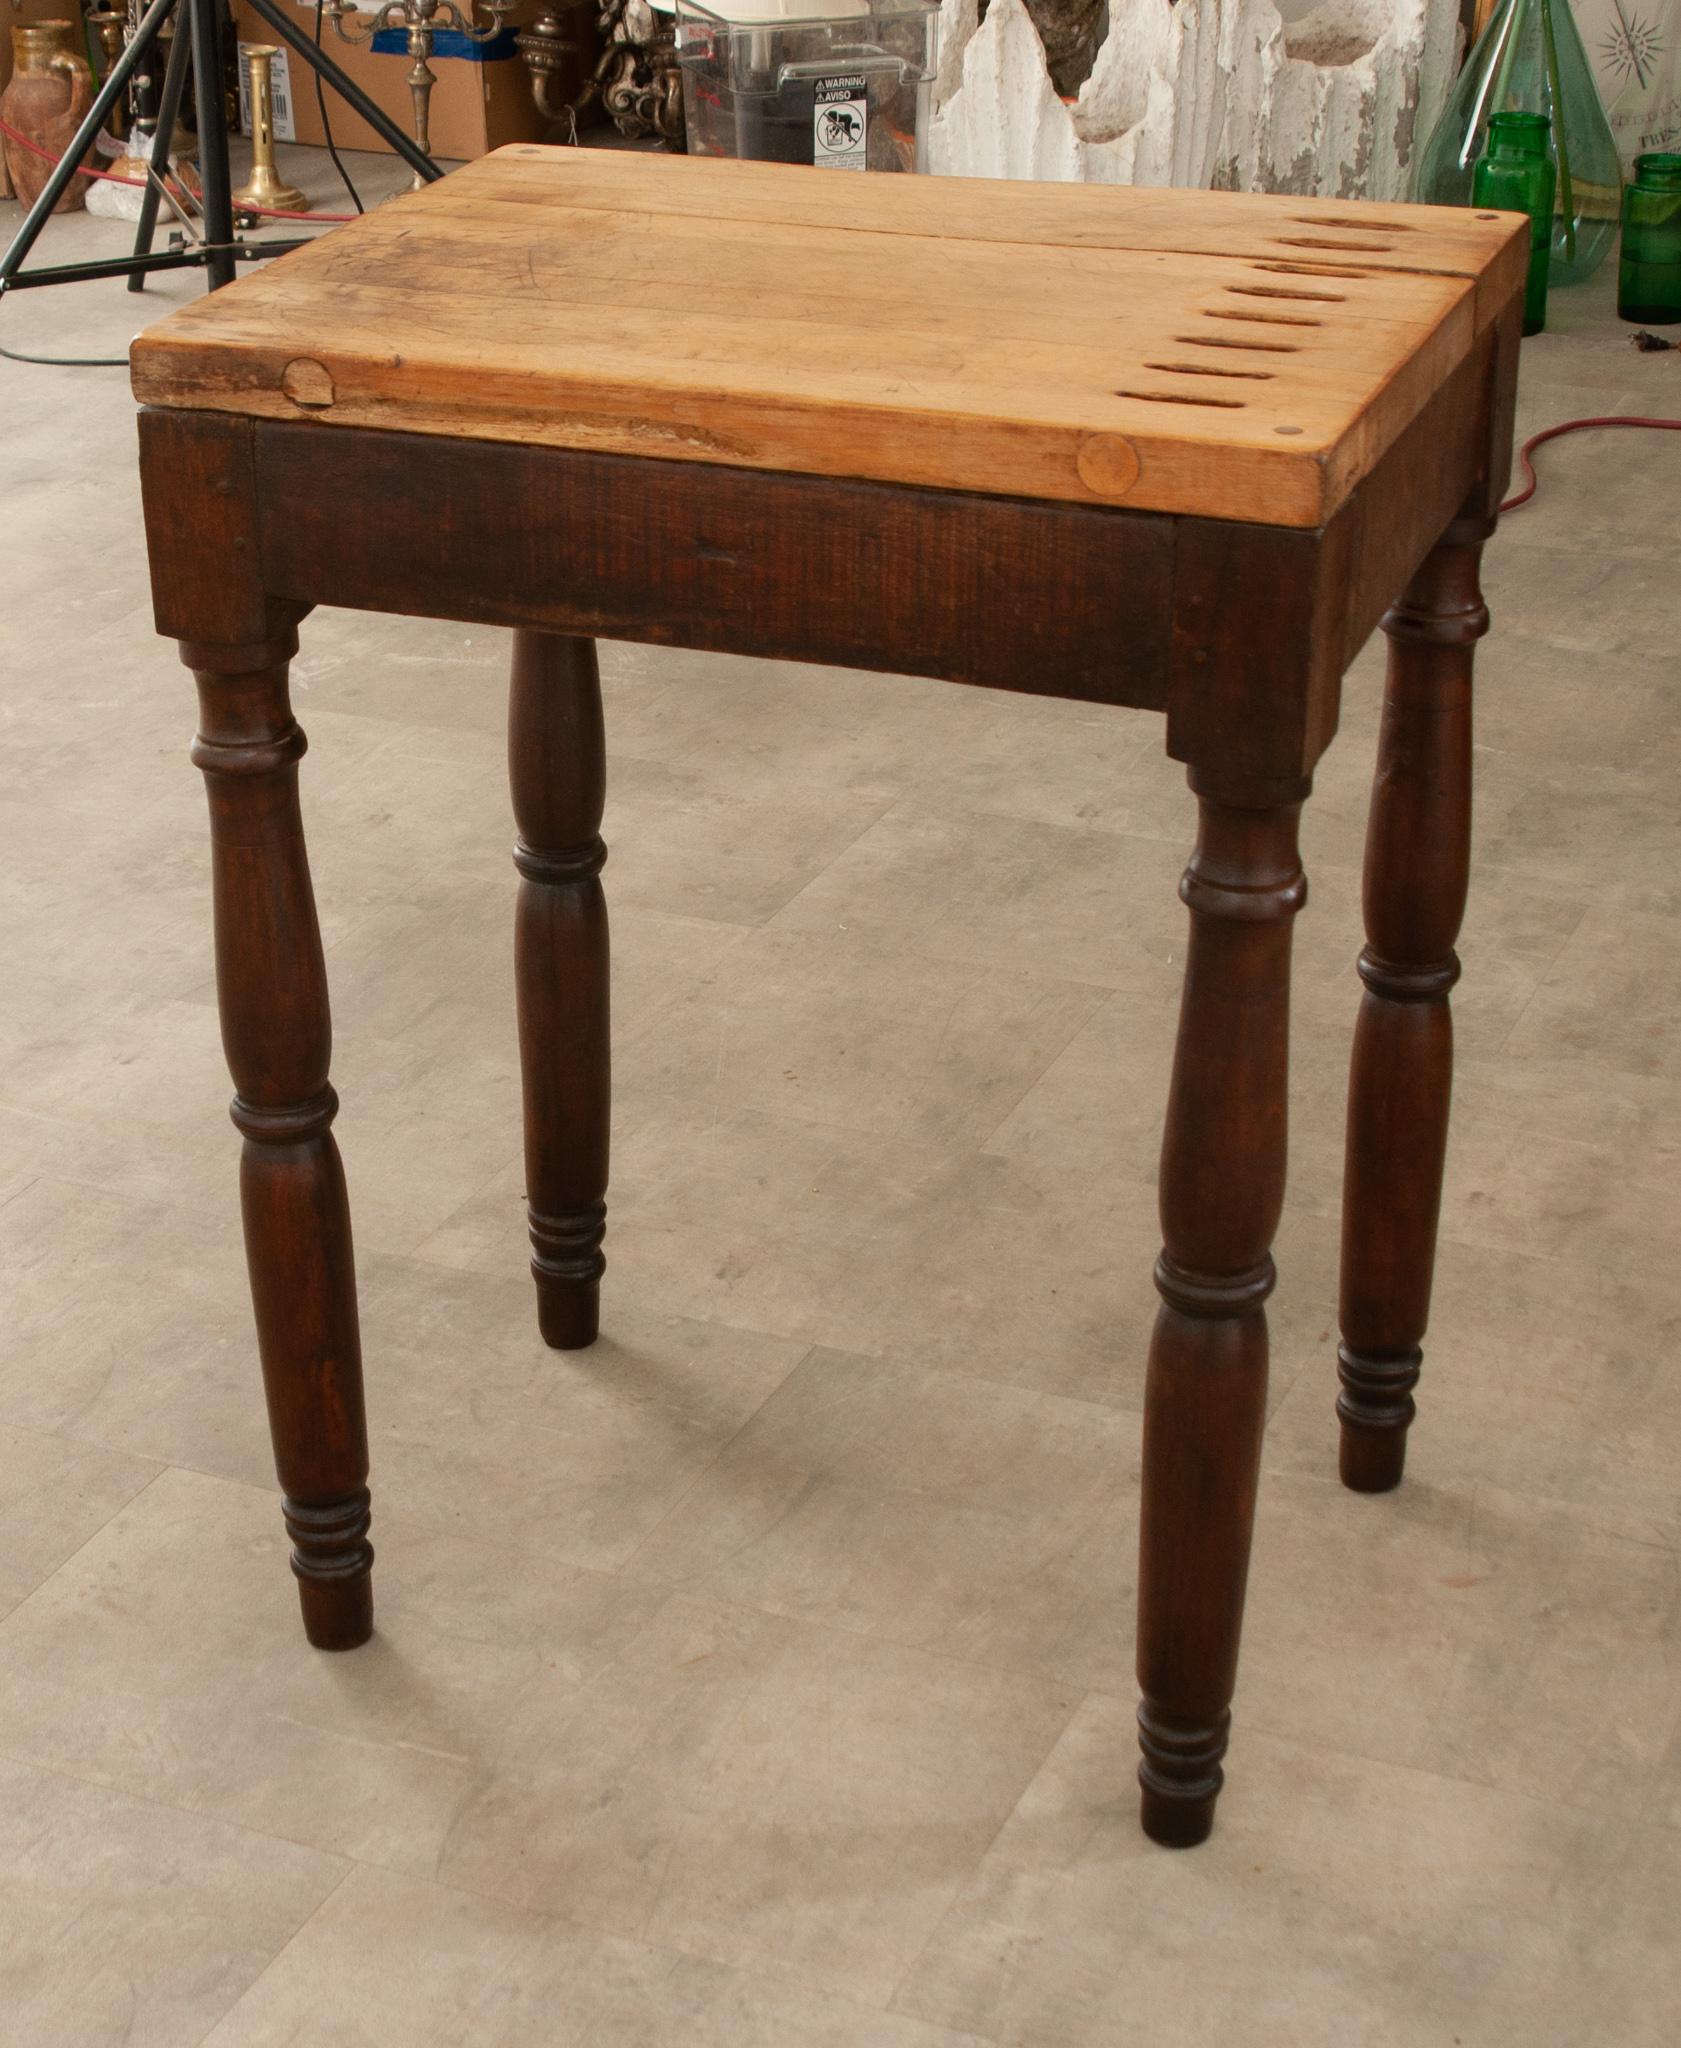 A fantastic little chef’s table, this French 19th century charcuterie table teems with character and functionality. The table features a chopping board top with slots to hold up to eight knives. The 1-½” thick top is an ideal surface for cutting,